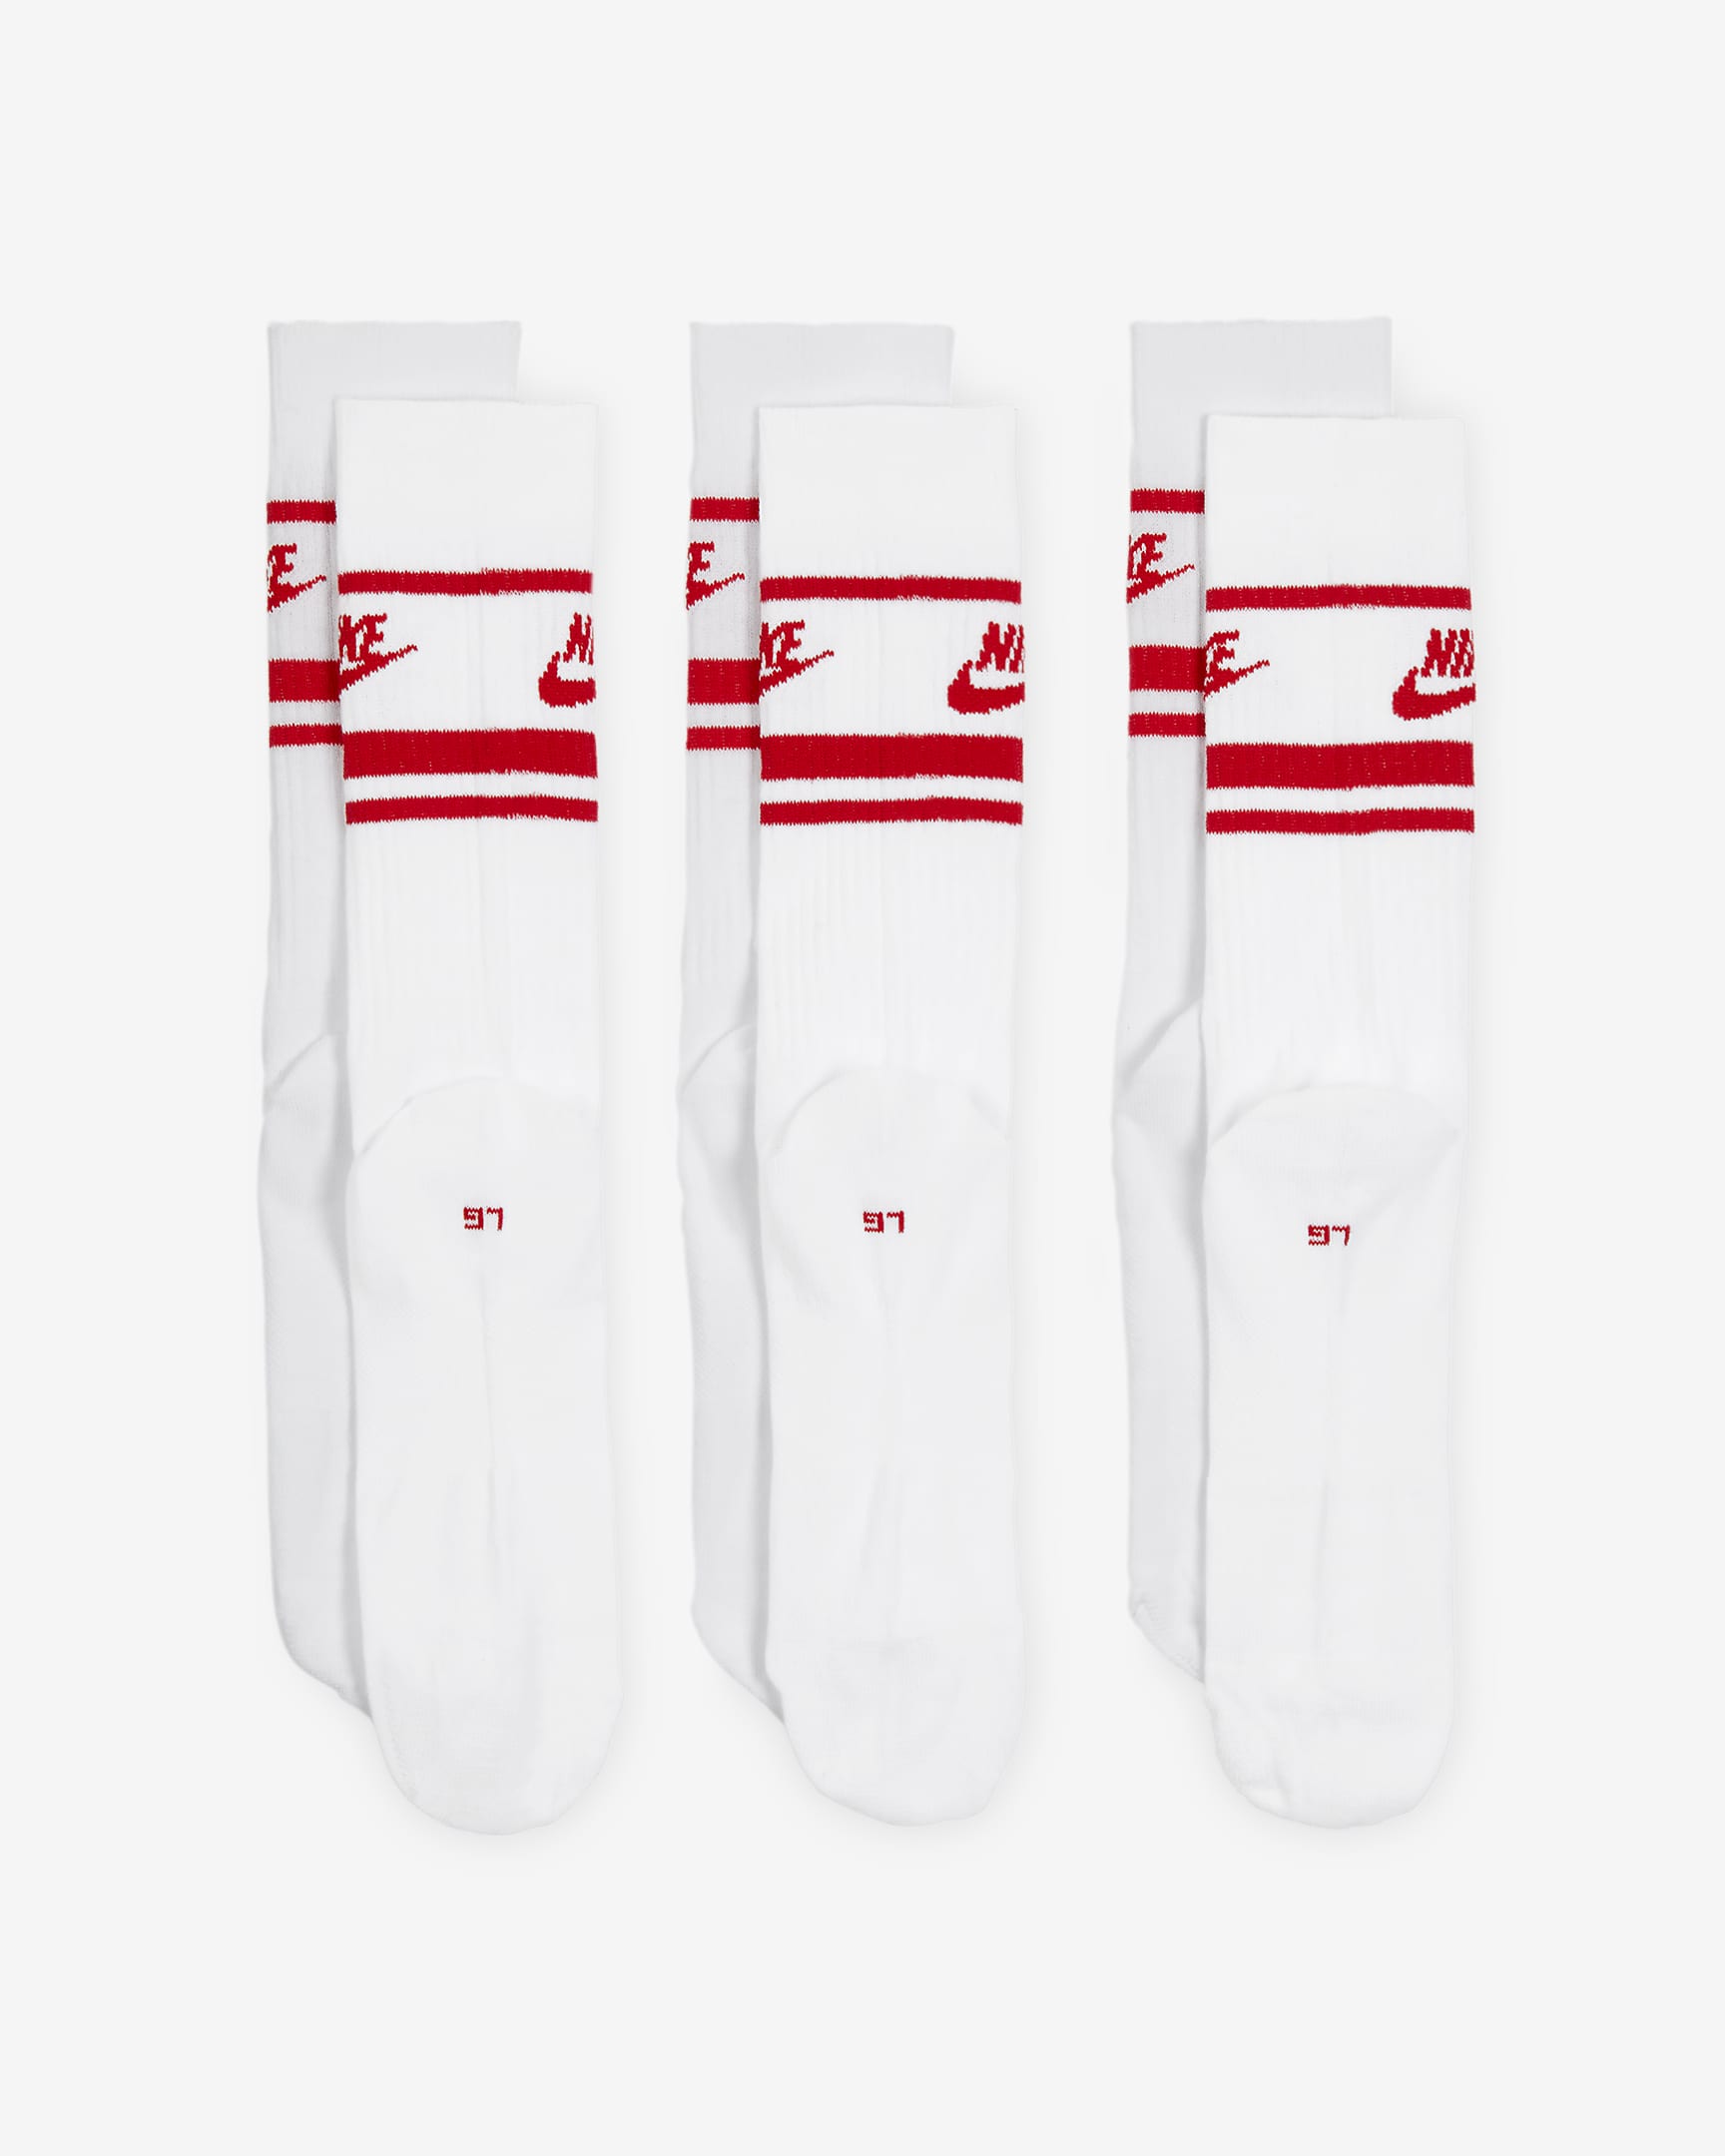 Chaussettes mi-mollet Nike Sportswear Dri-FIT Everyday Essential (3 paires) - Blanc/University Red/University Red